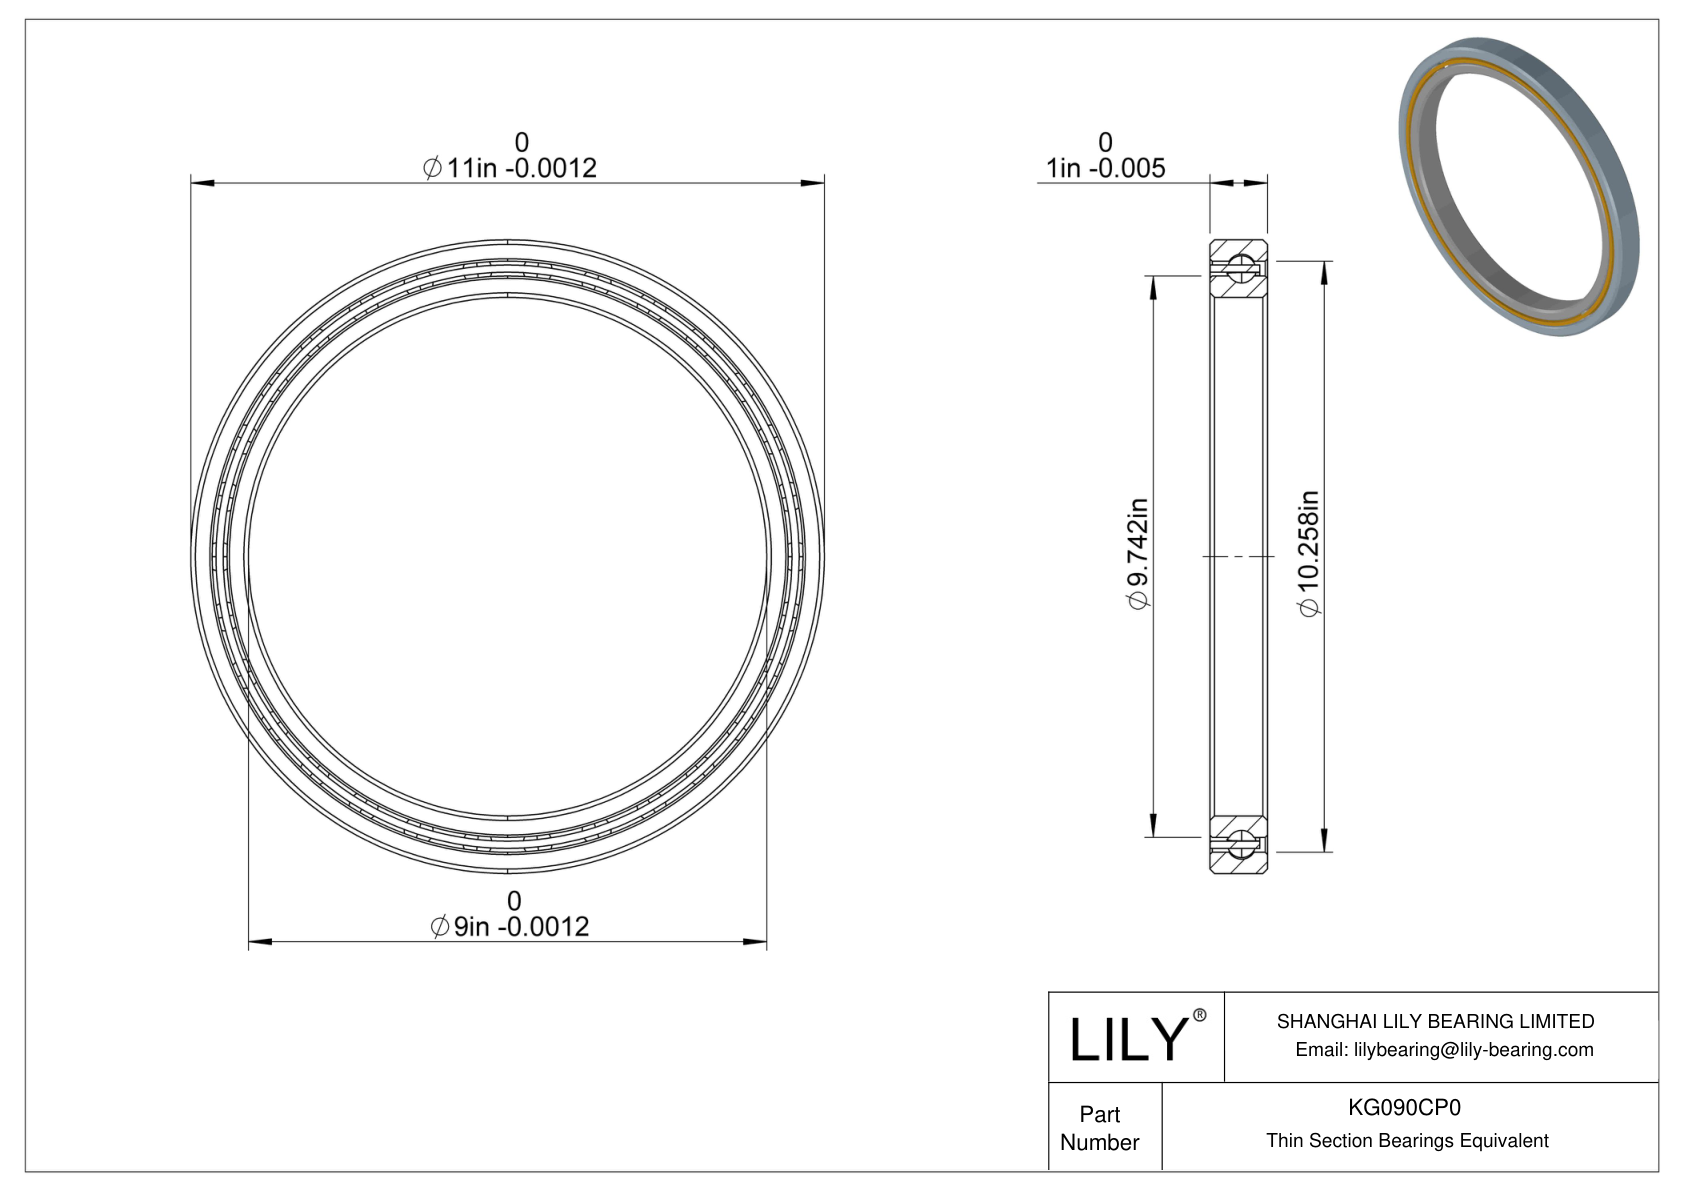 KG090CP0 Constant Section (CS) Bearings cad drawing